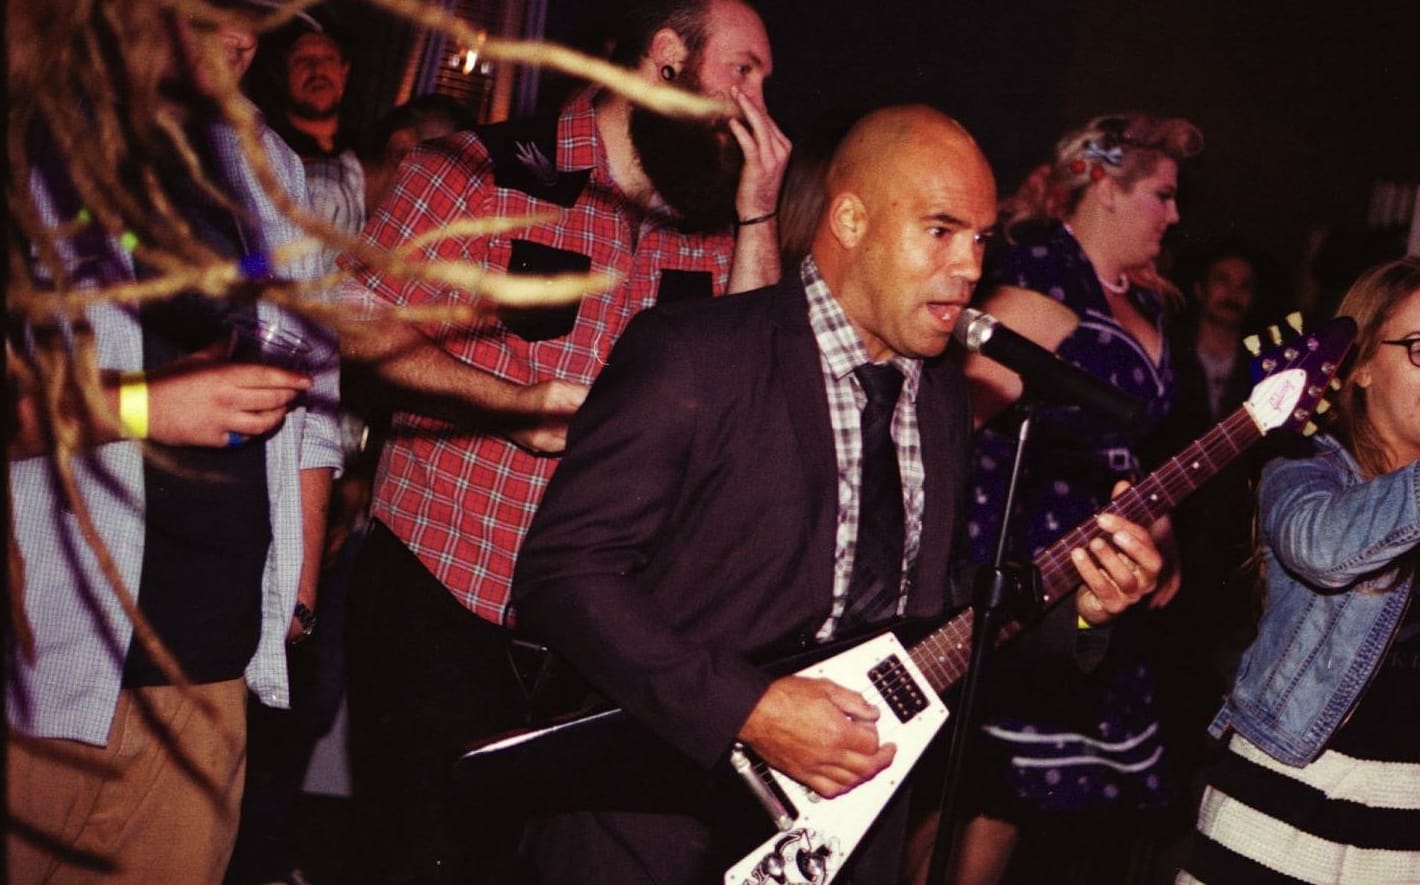 Manuel Springford performing with his band WavePig, who perform some songs in Te Reo